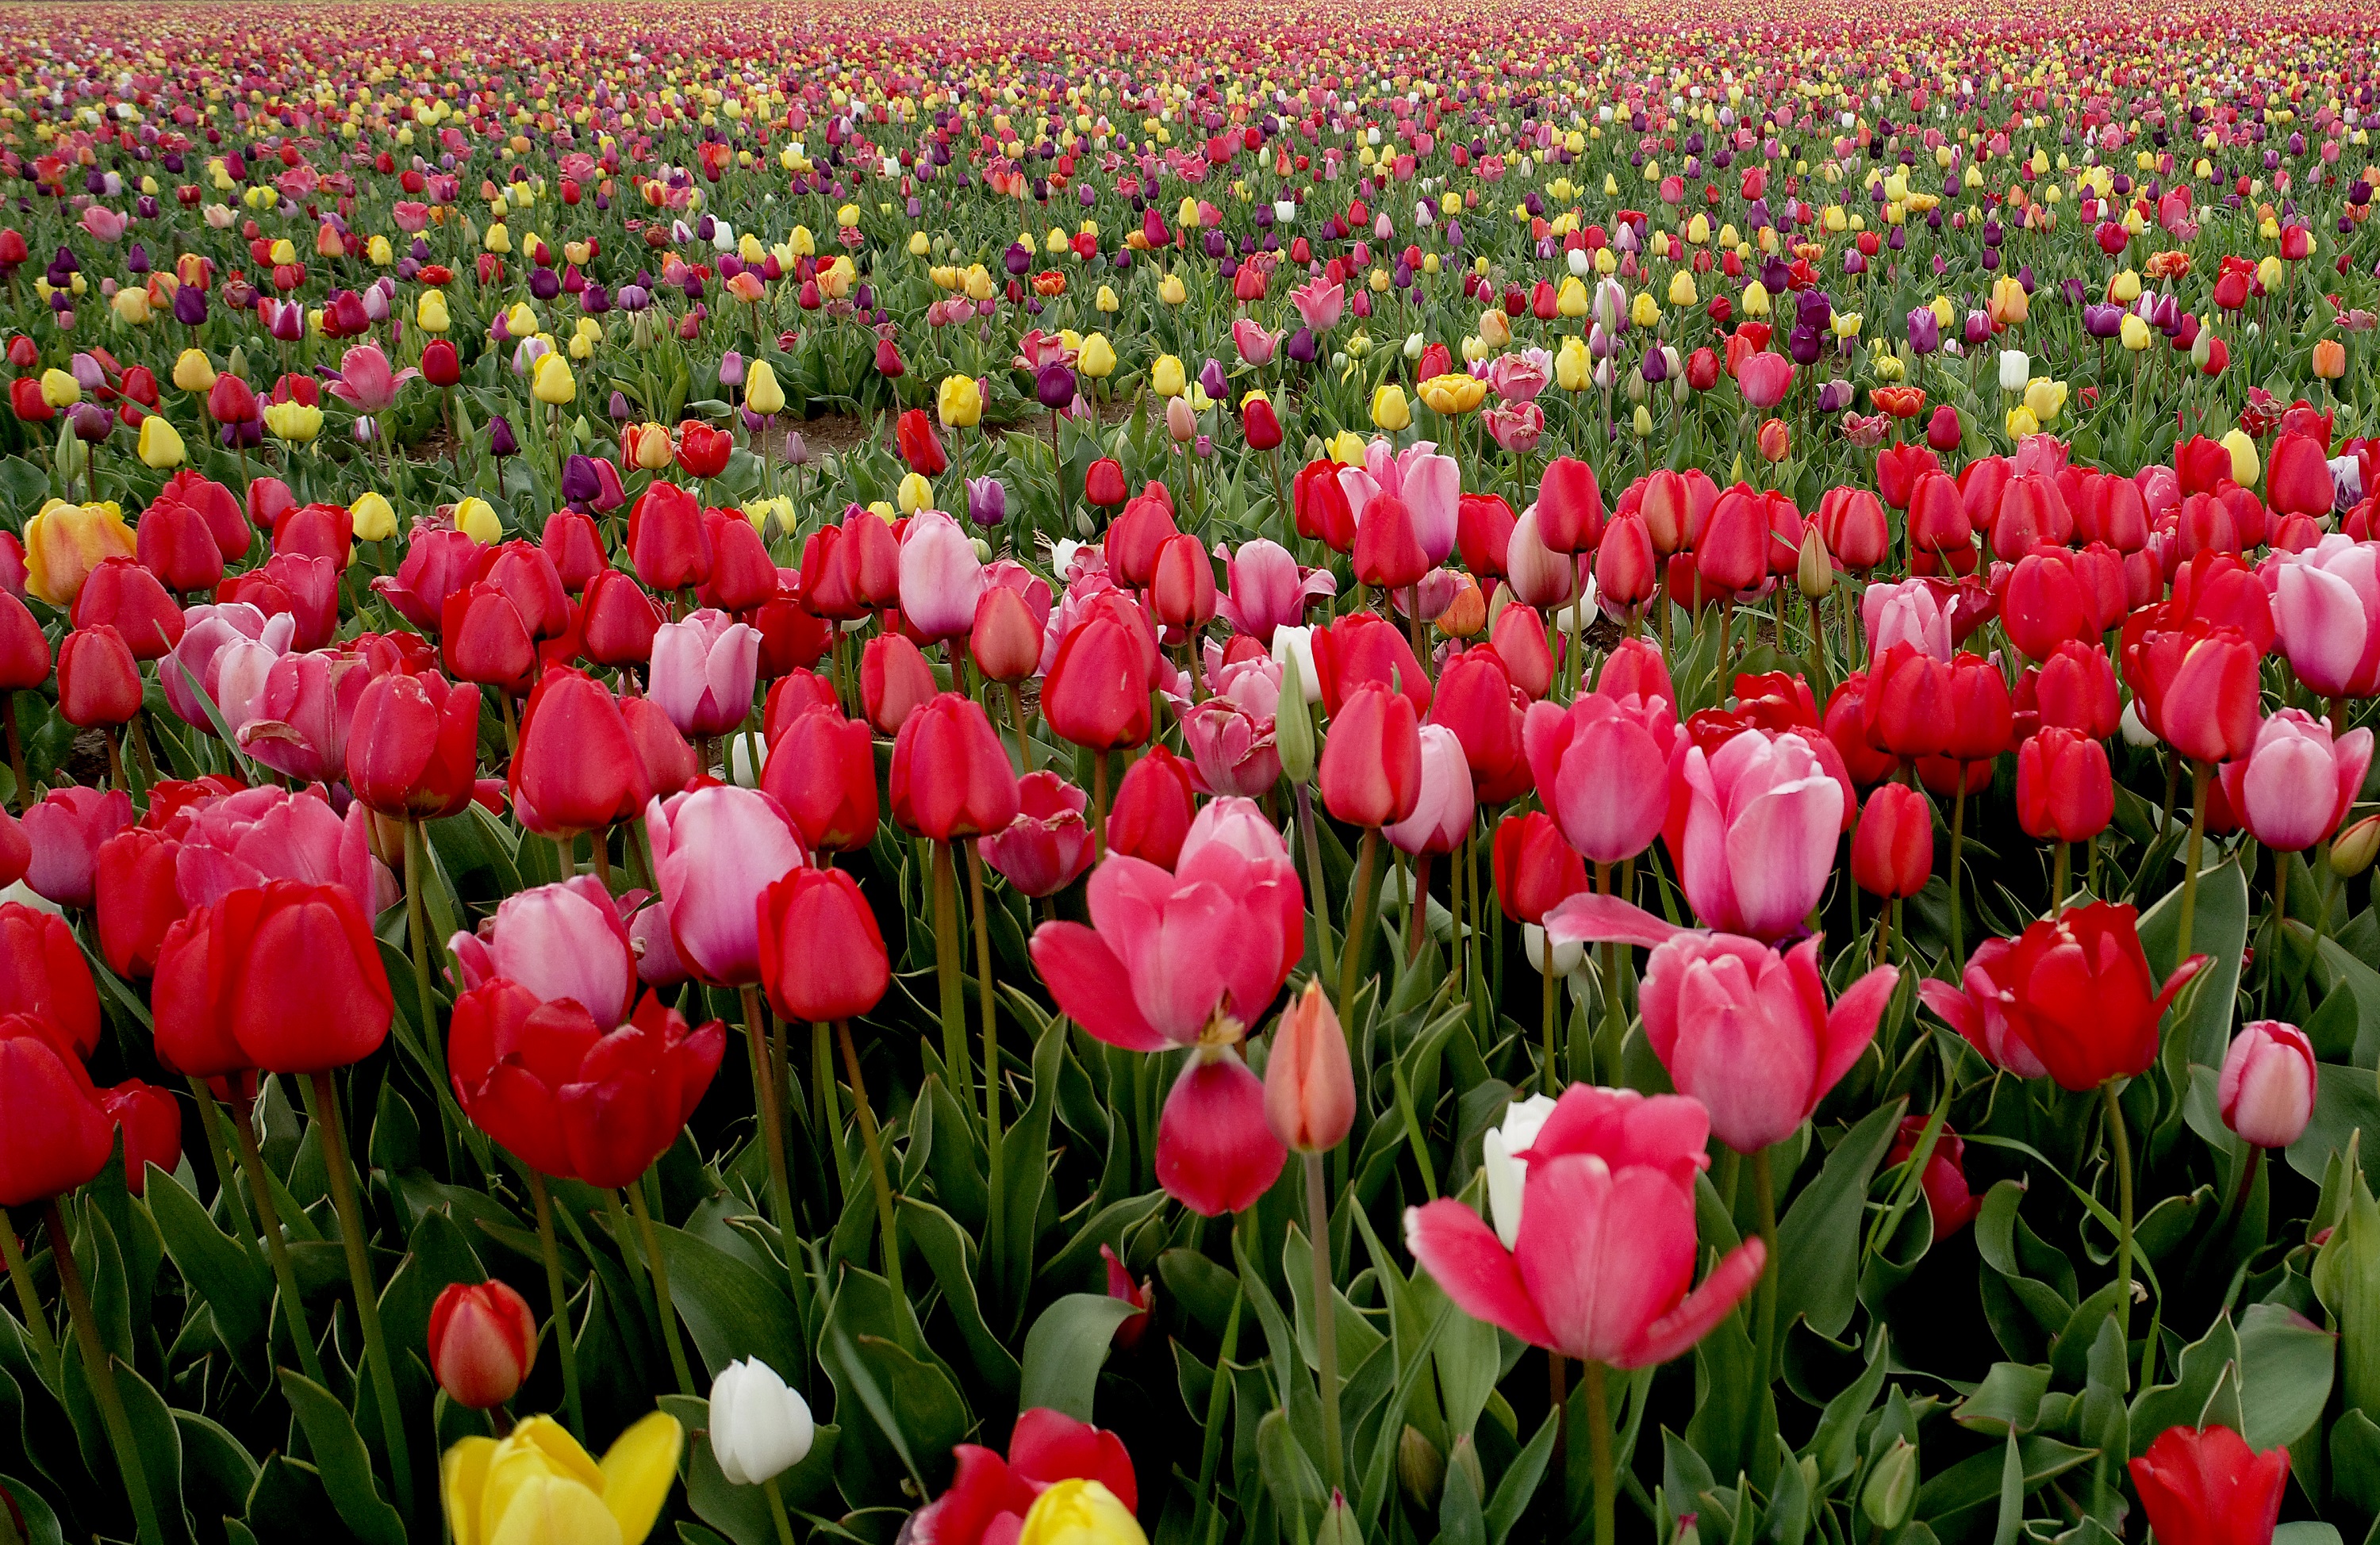 Colorful tulips are seen through a field of tulips in Konya